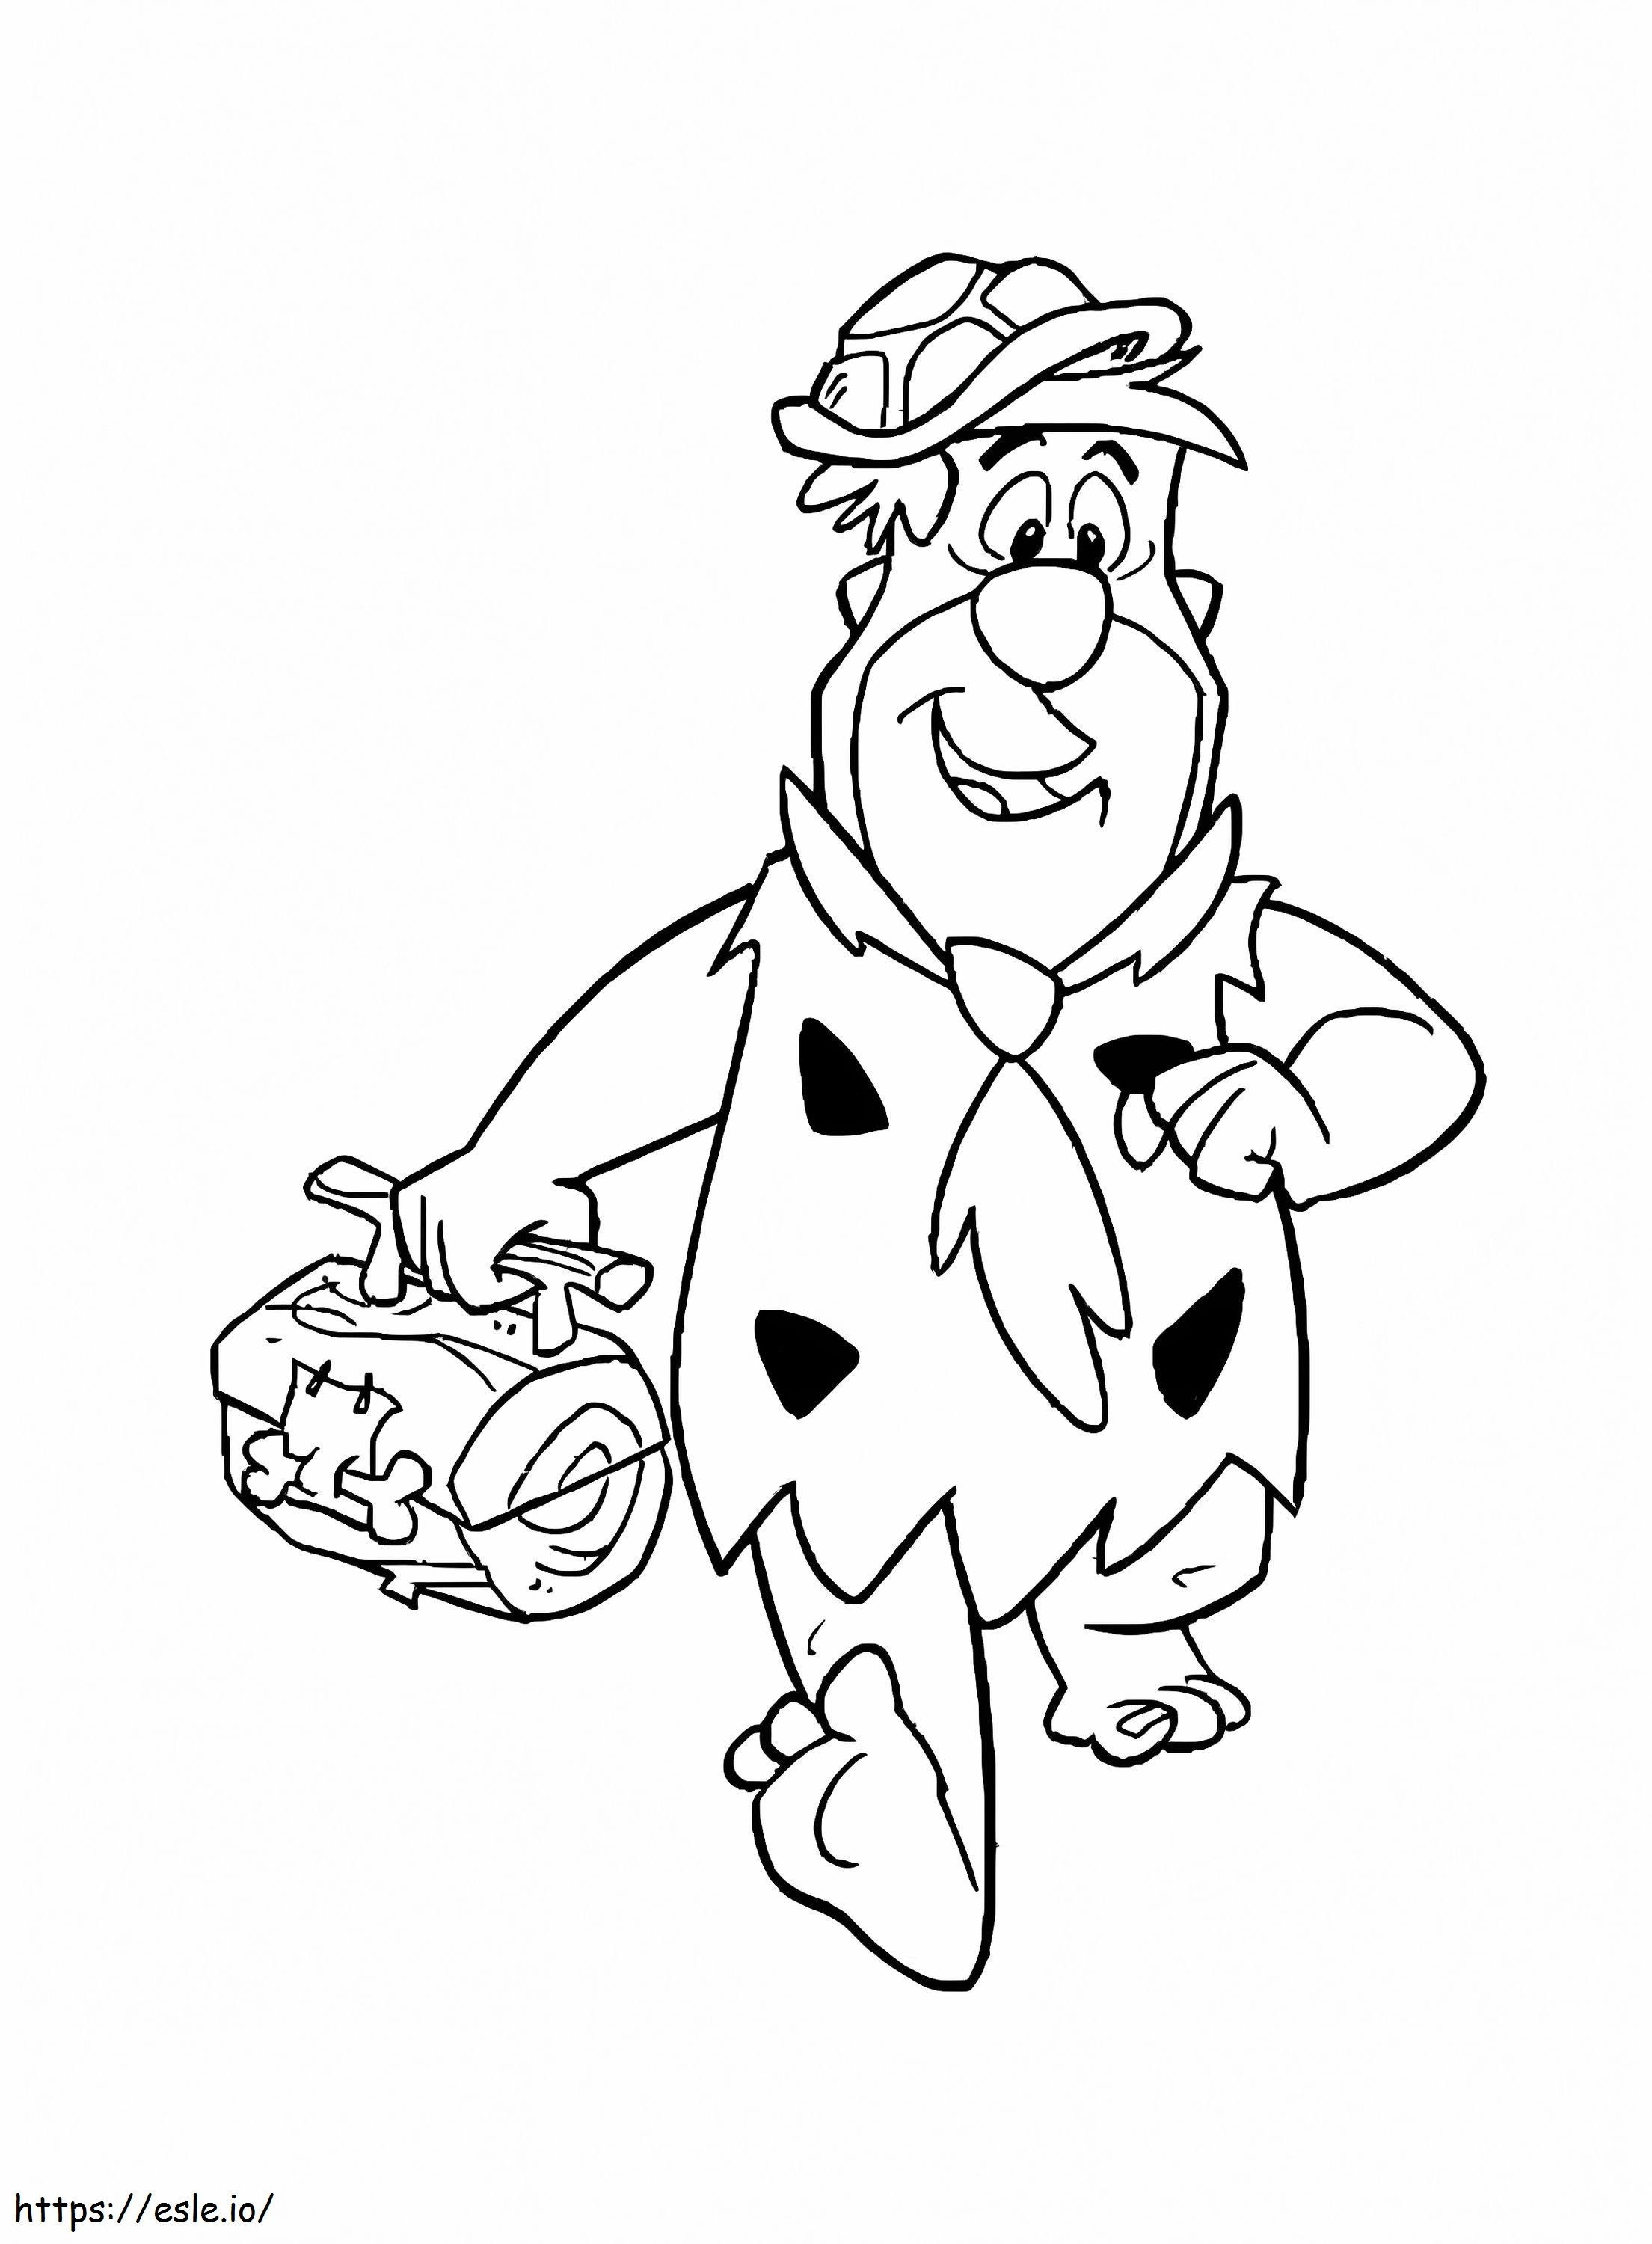 Fred Flintstones Running coloring page